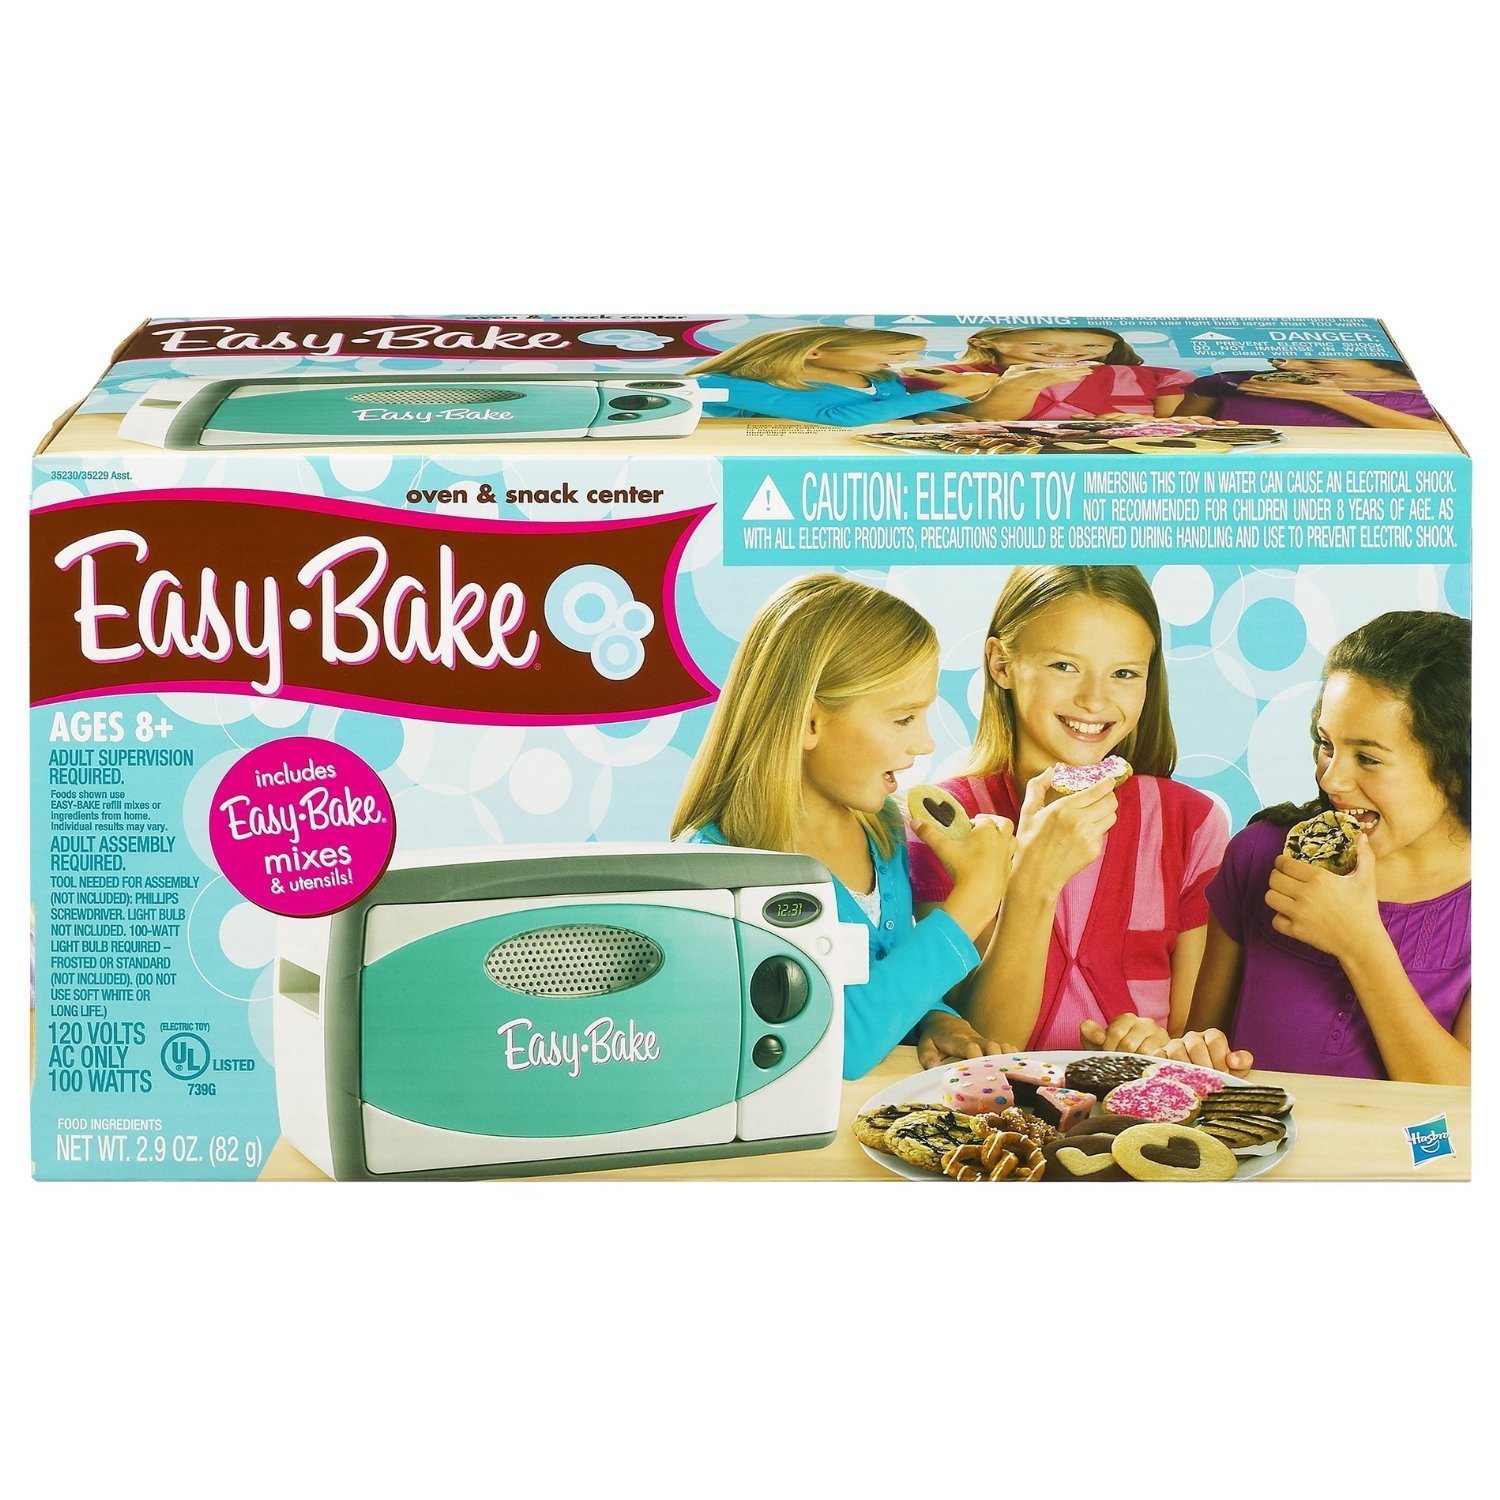 The Easy-Bake Oven was a kid favorite in the 90's and if you can find one for cheap a great a great family heirloom. <br/><br/> You can pick this up at  <a href="https://amzn.to/2IWeKze">Amazon Prices Very</a>.